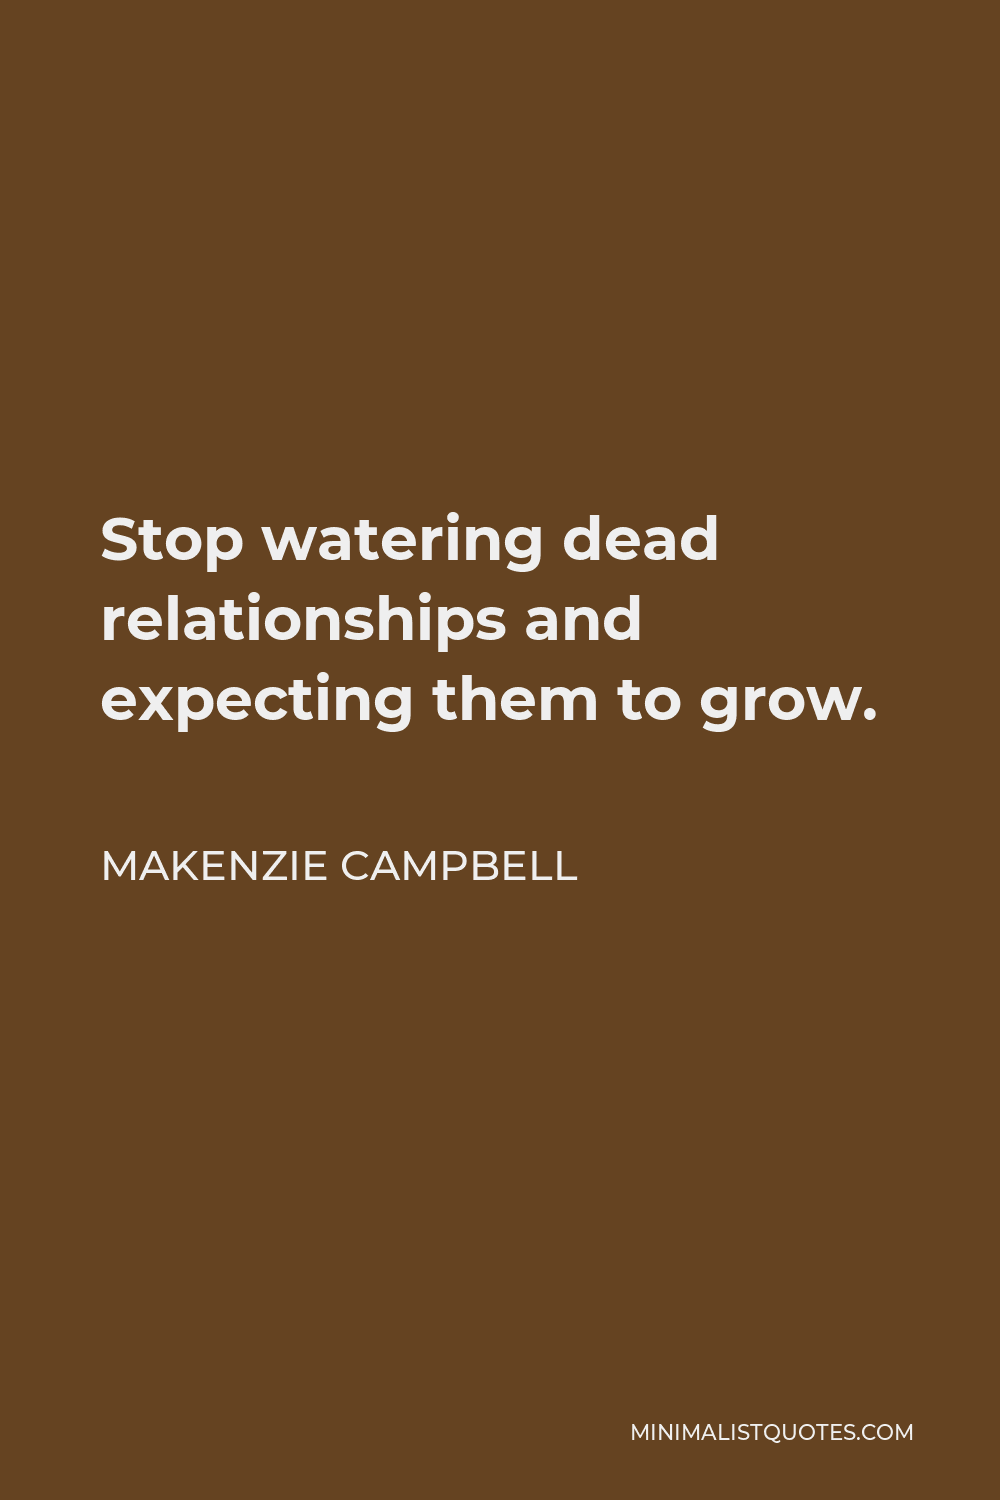 Makenzie Campbell Quote - Stop watering dead relationships and expecting them to grow.